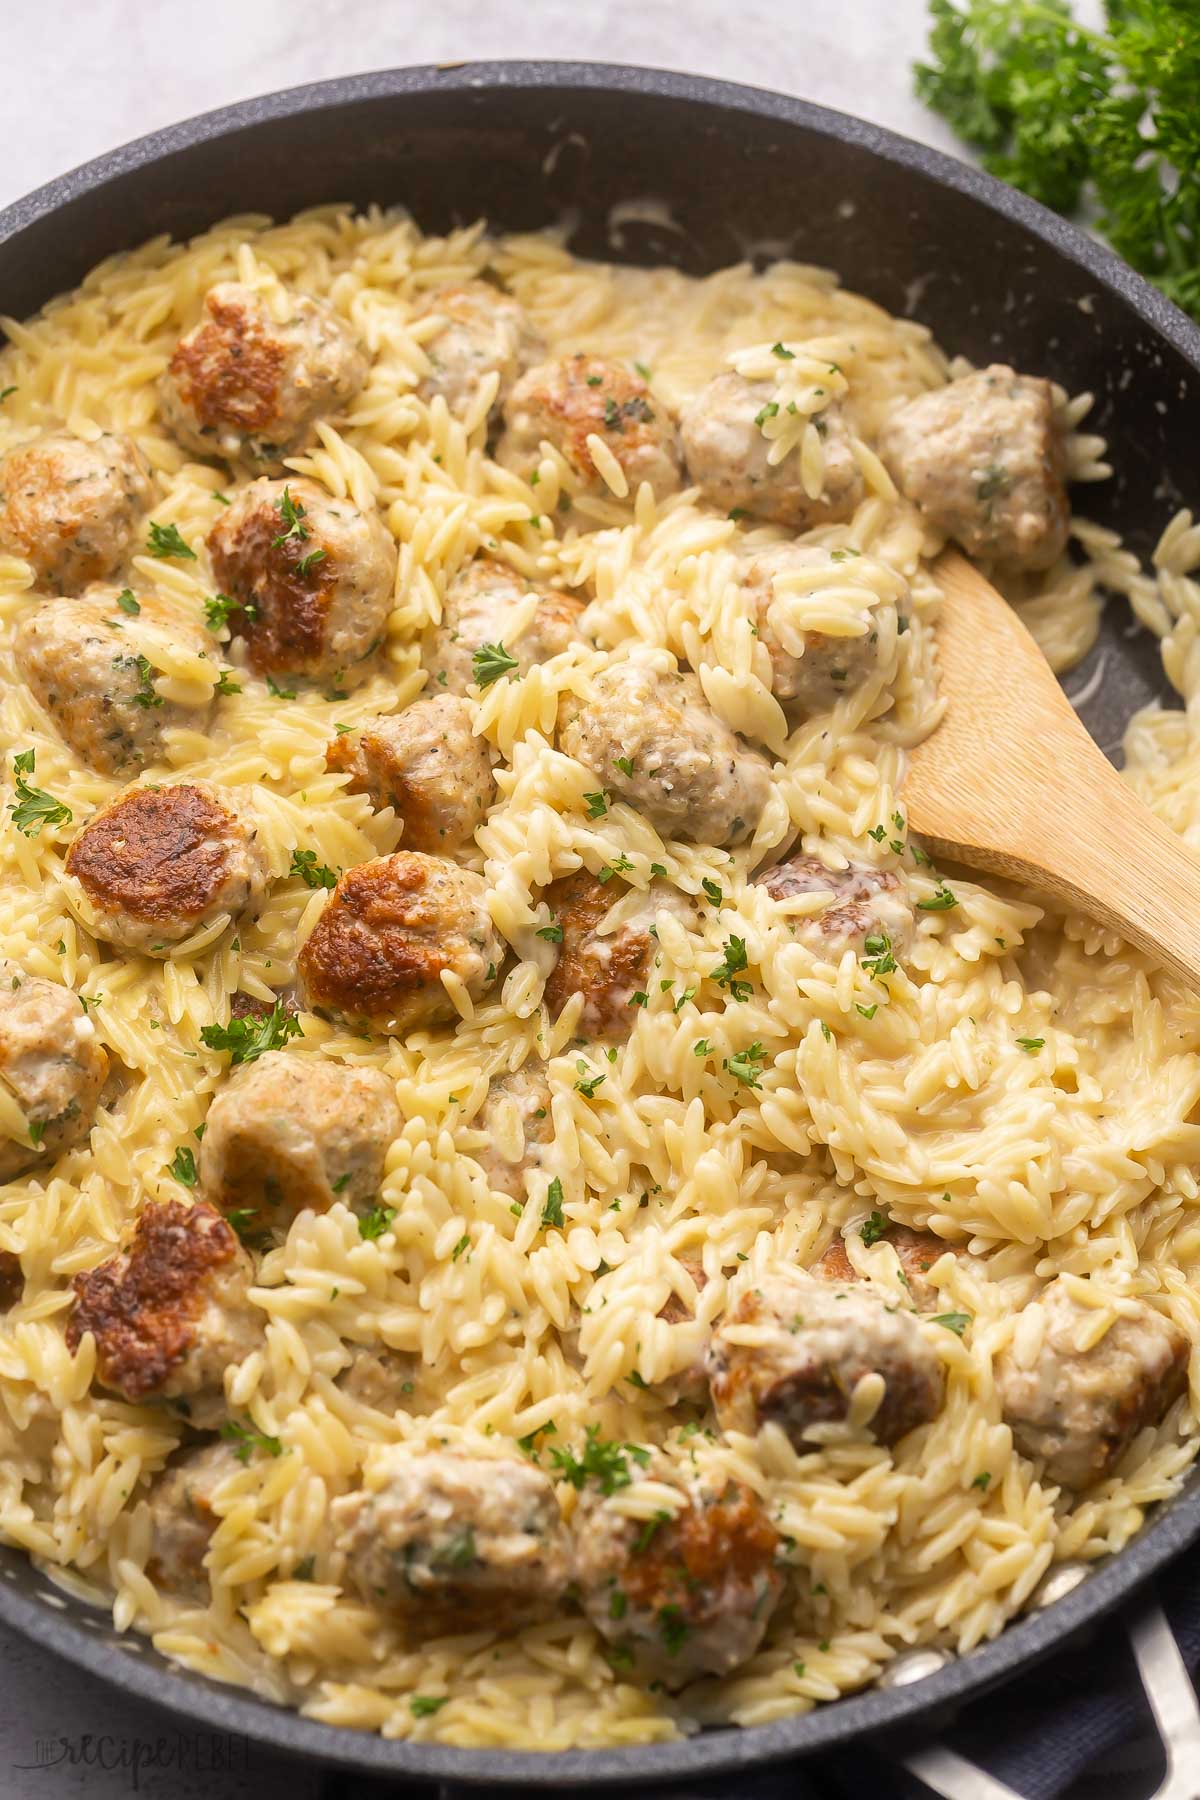 chicken meatballs and orzo in black pan with wooden ladle.